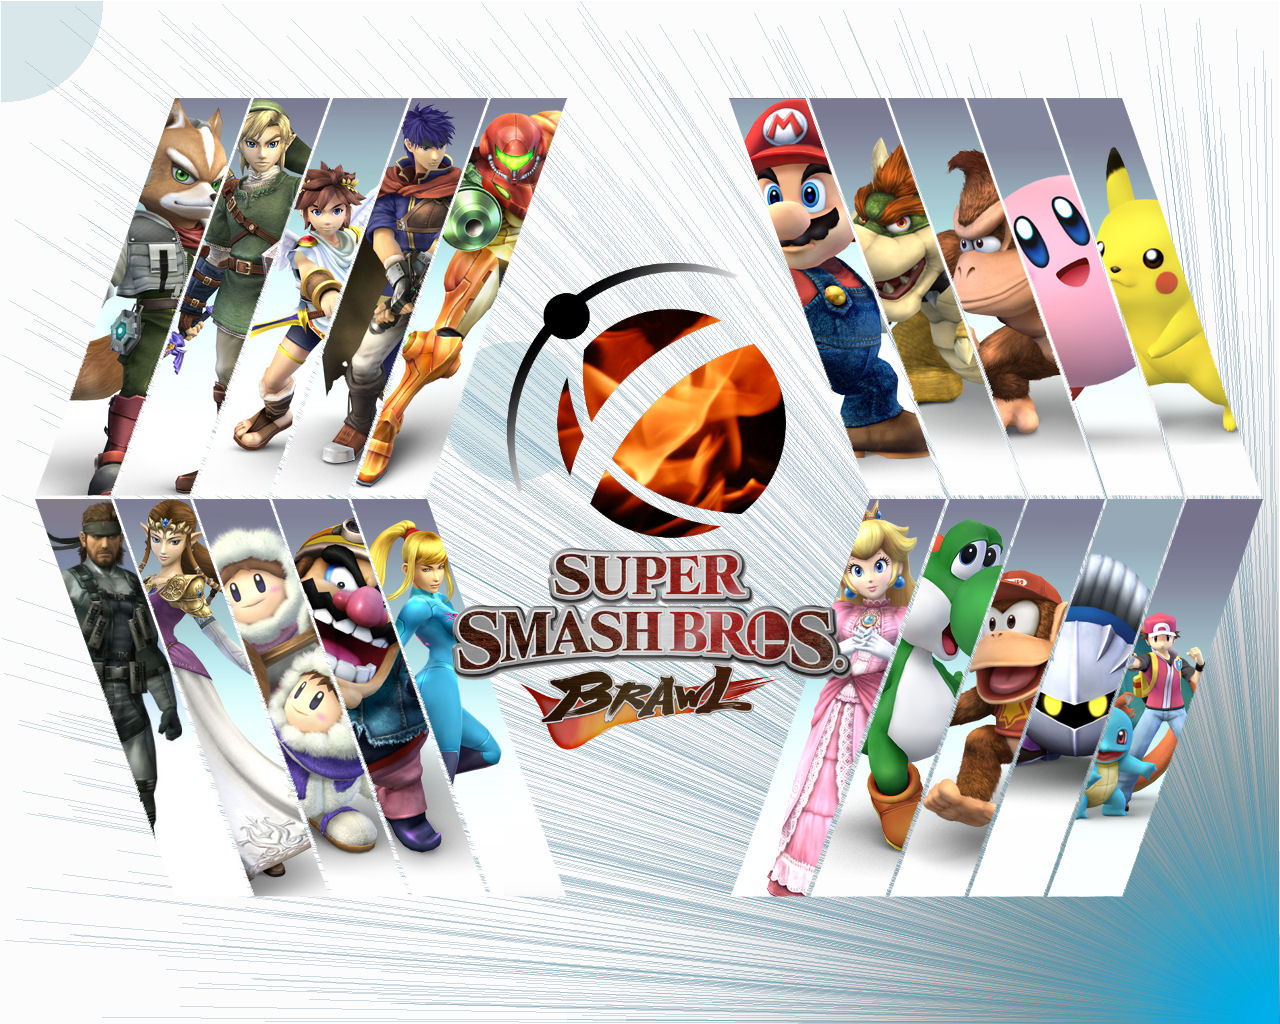 171 Super Smash Bros. HD Wallpapers Backgrounds - Wallpaper Abyss